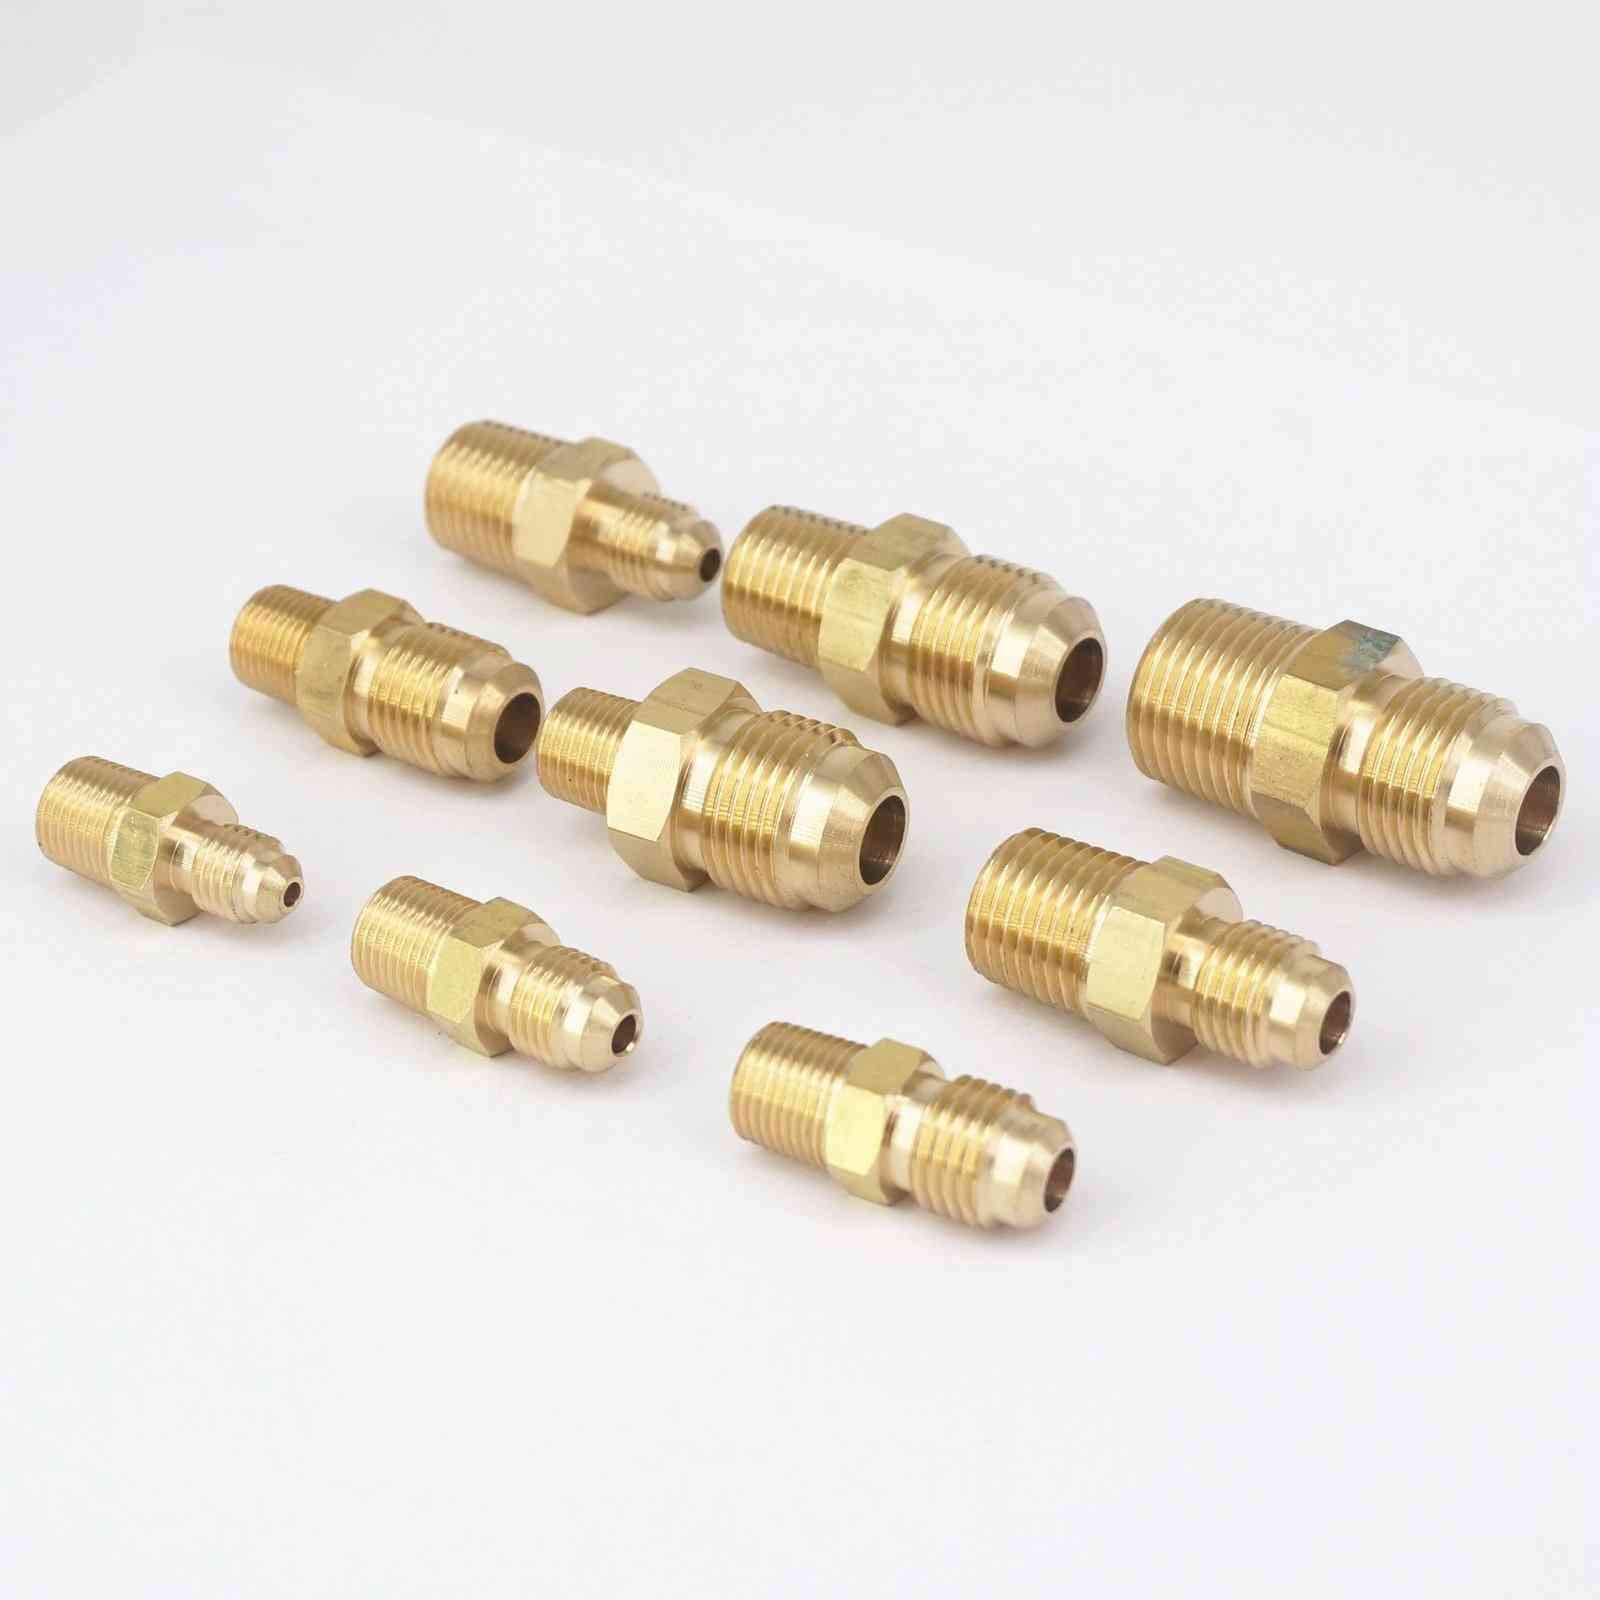 45 Degree Pipe Fittings Adapters Connectors